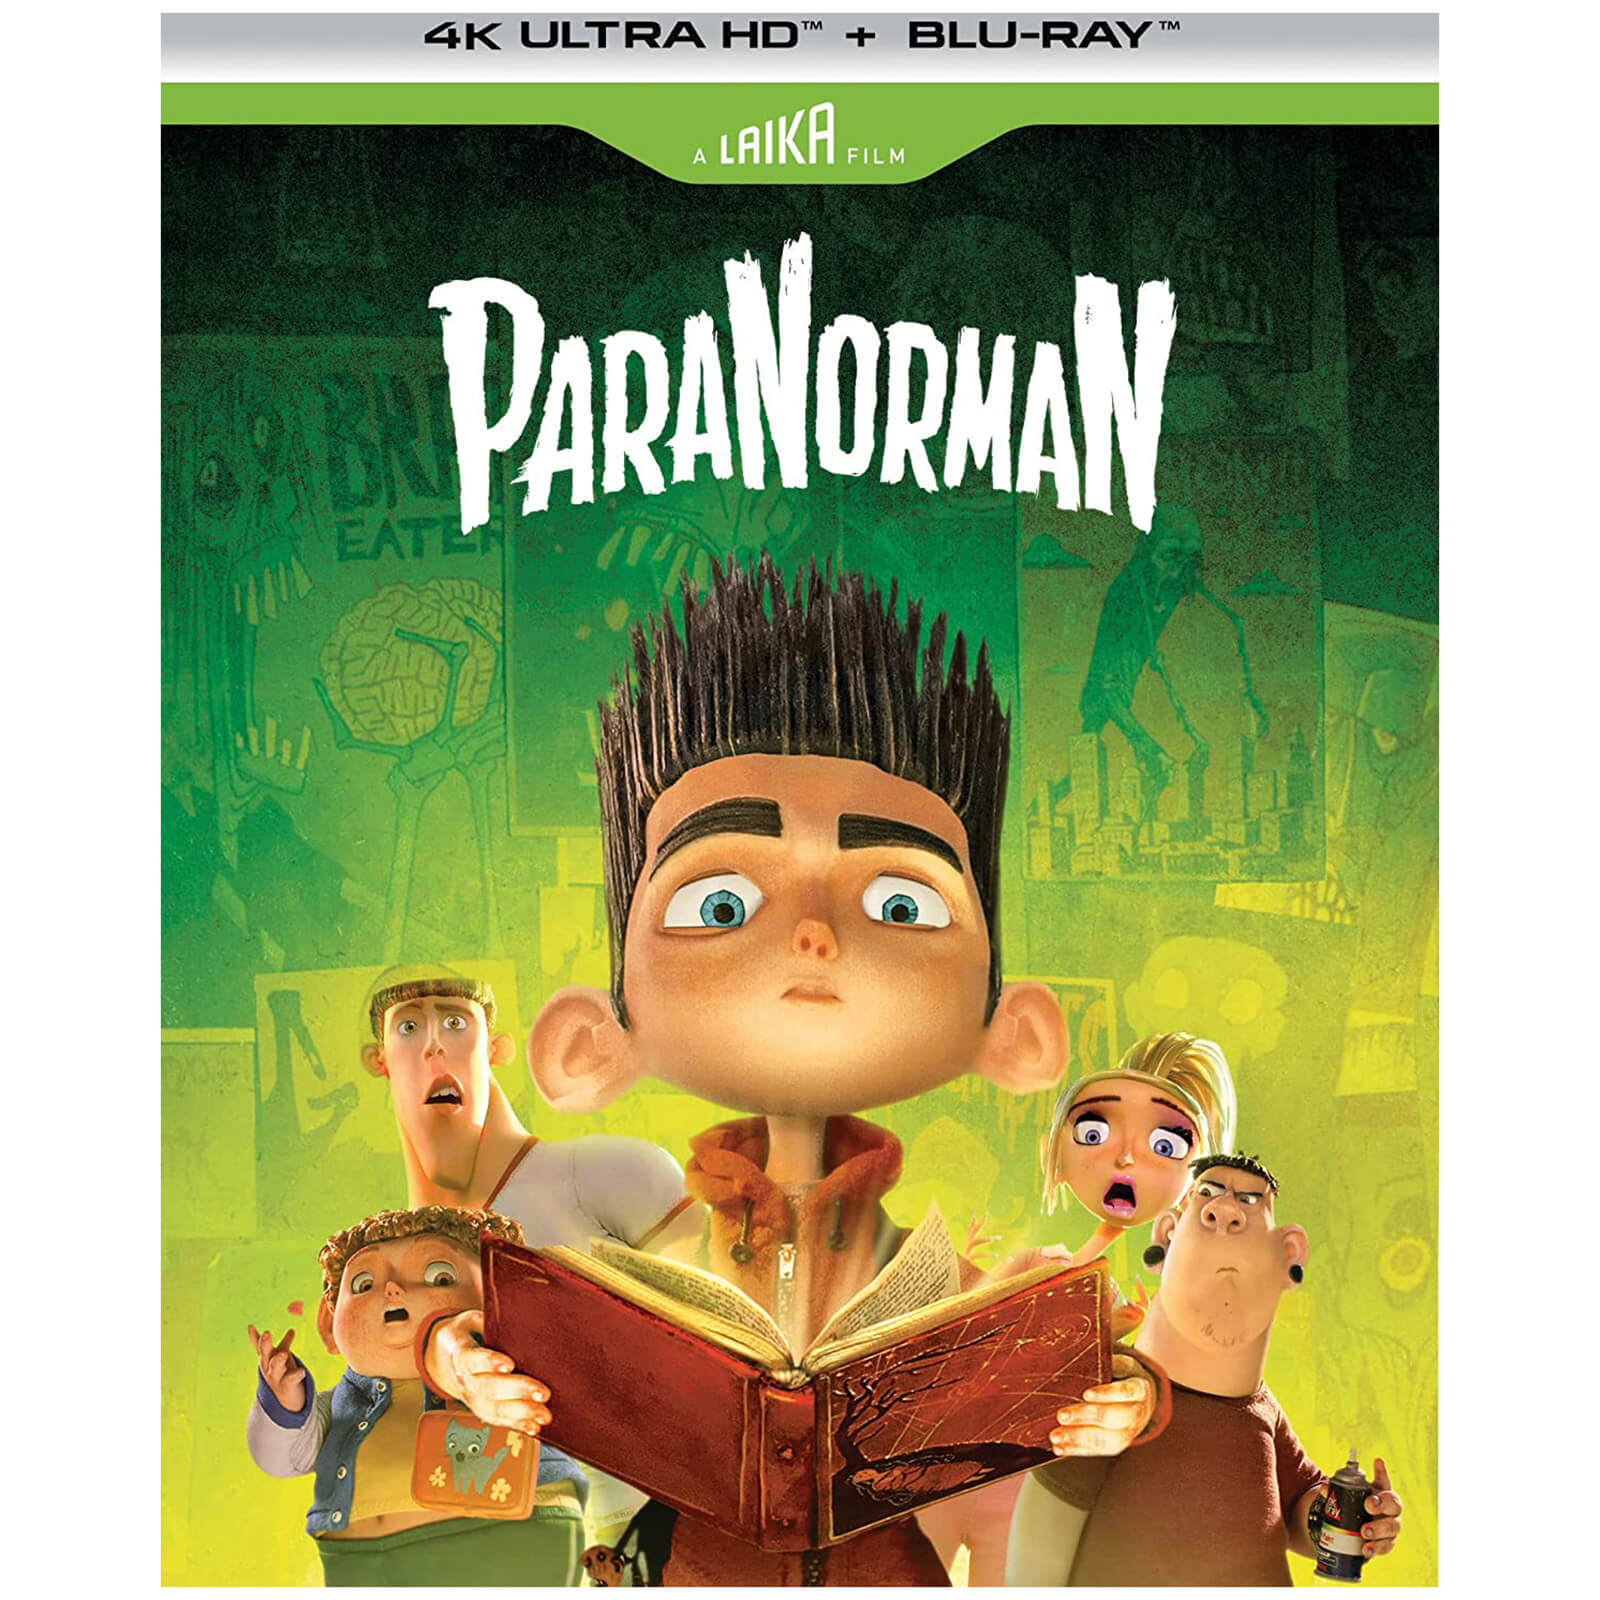 Paranorman 4K Ultra HD (Includes Blu-ray)